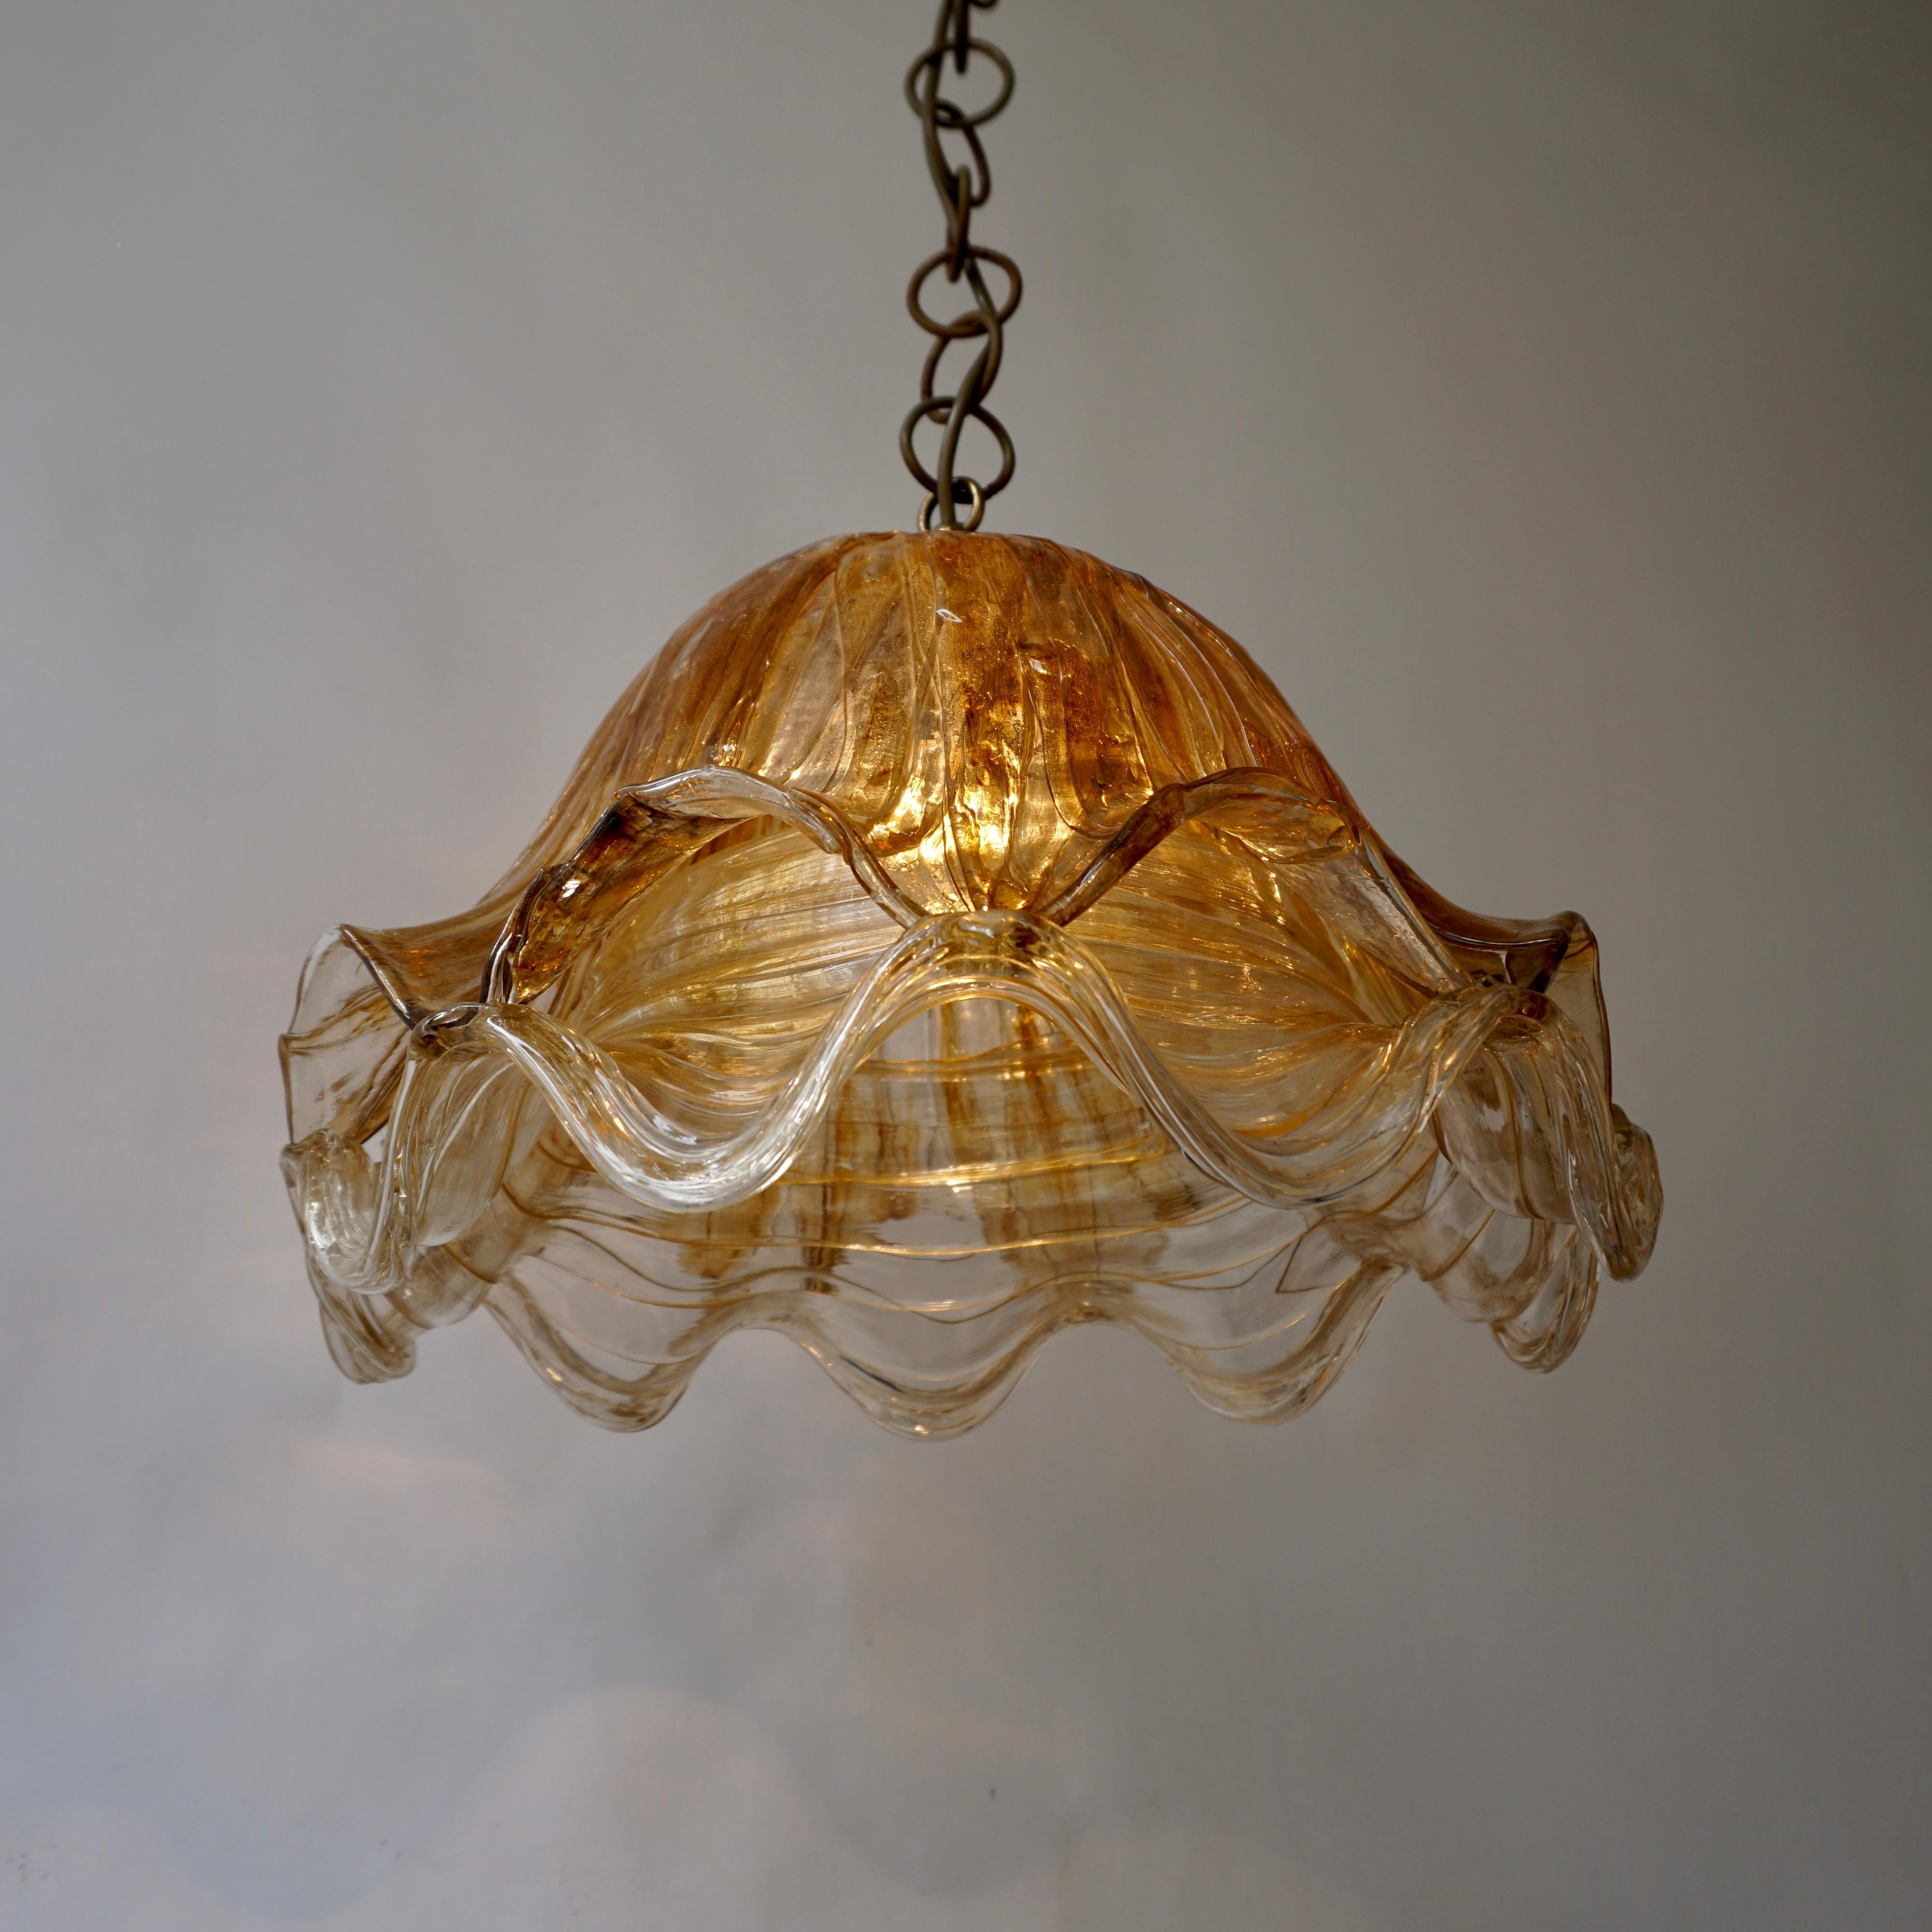 Brown and Transparent Acrylic Pendant Lamp, 1970s For Sale 5